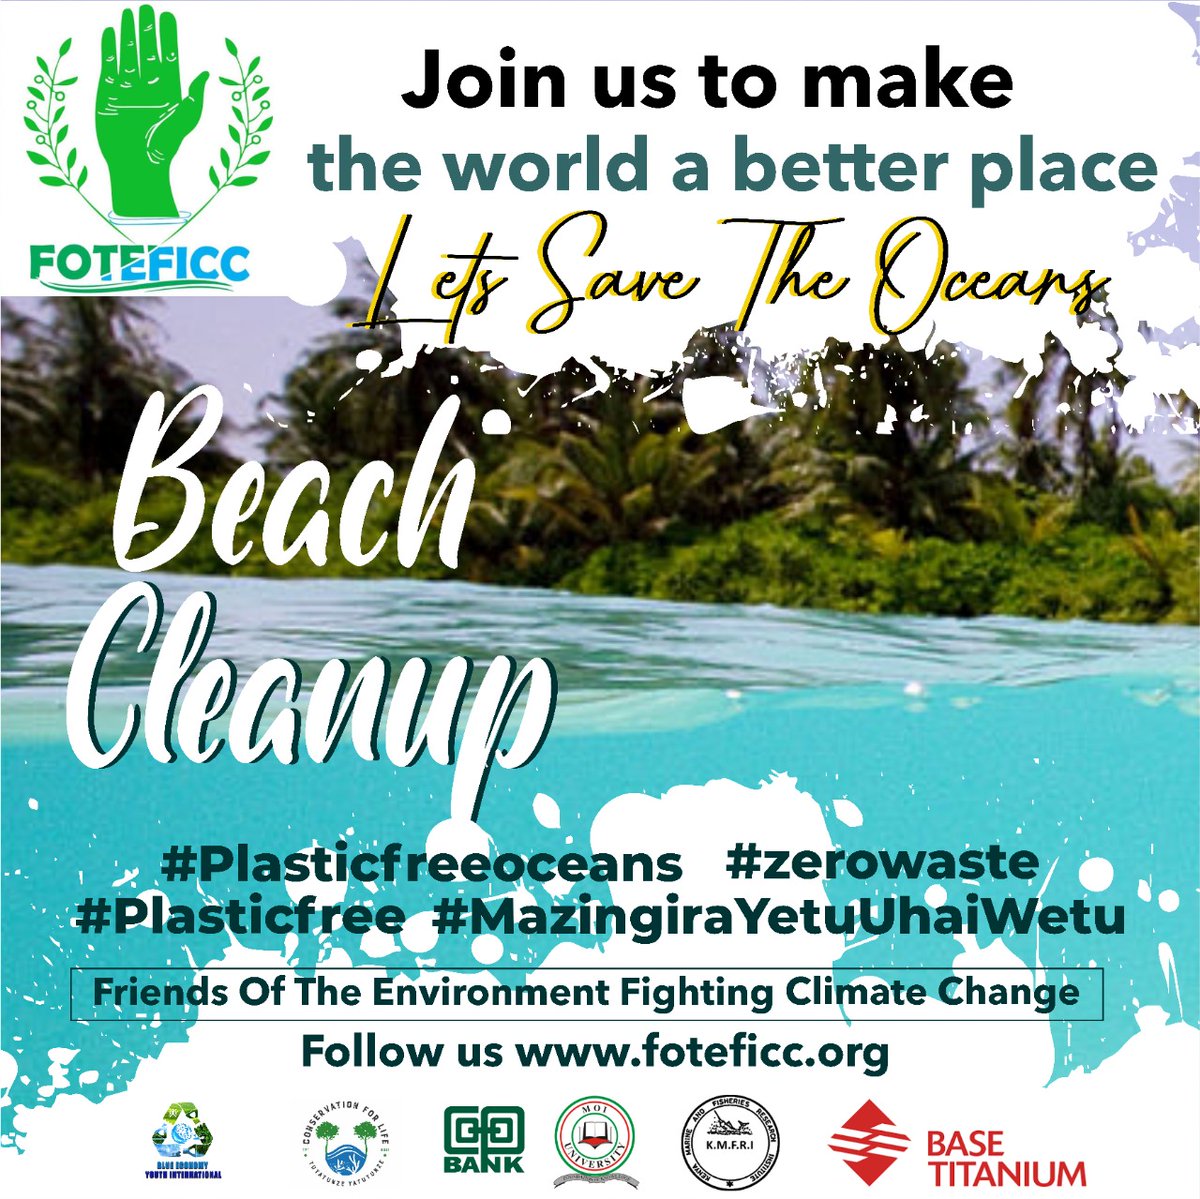 17/09/2022 is the #InternationalCoastalCleanUpDay   whose theme is Connecting People for a #TrashFree Coastline.
Join us tomorrow in undertaking a #beachcleanup at #Diani #beach, starting from 8AM at the ABSA Bank grounds.
#plasticpollution #marinepollution #ocean #zerowaste